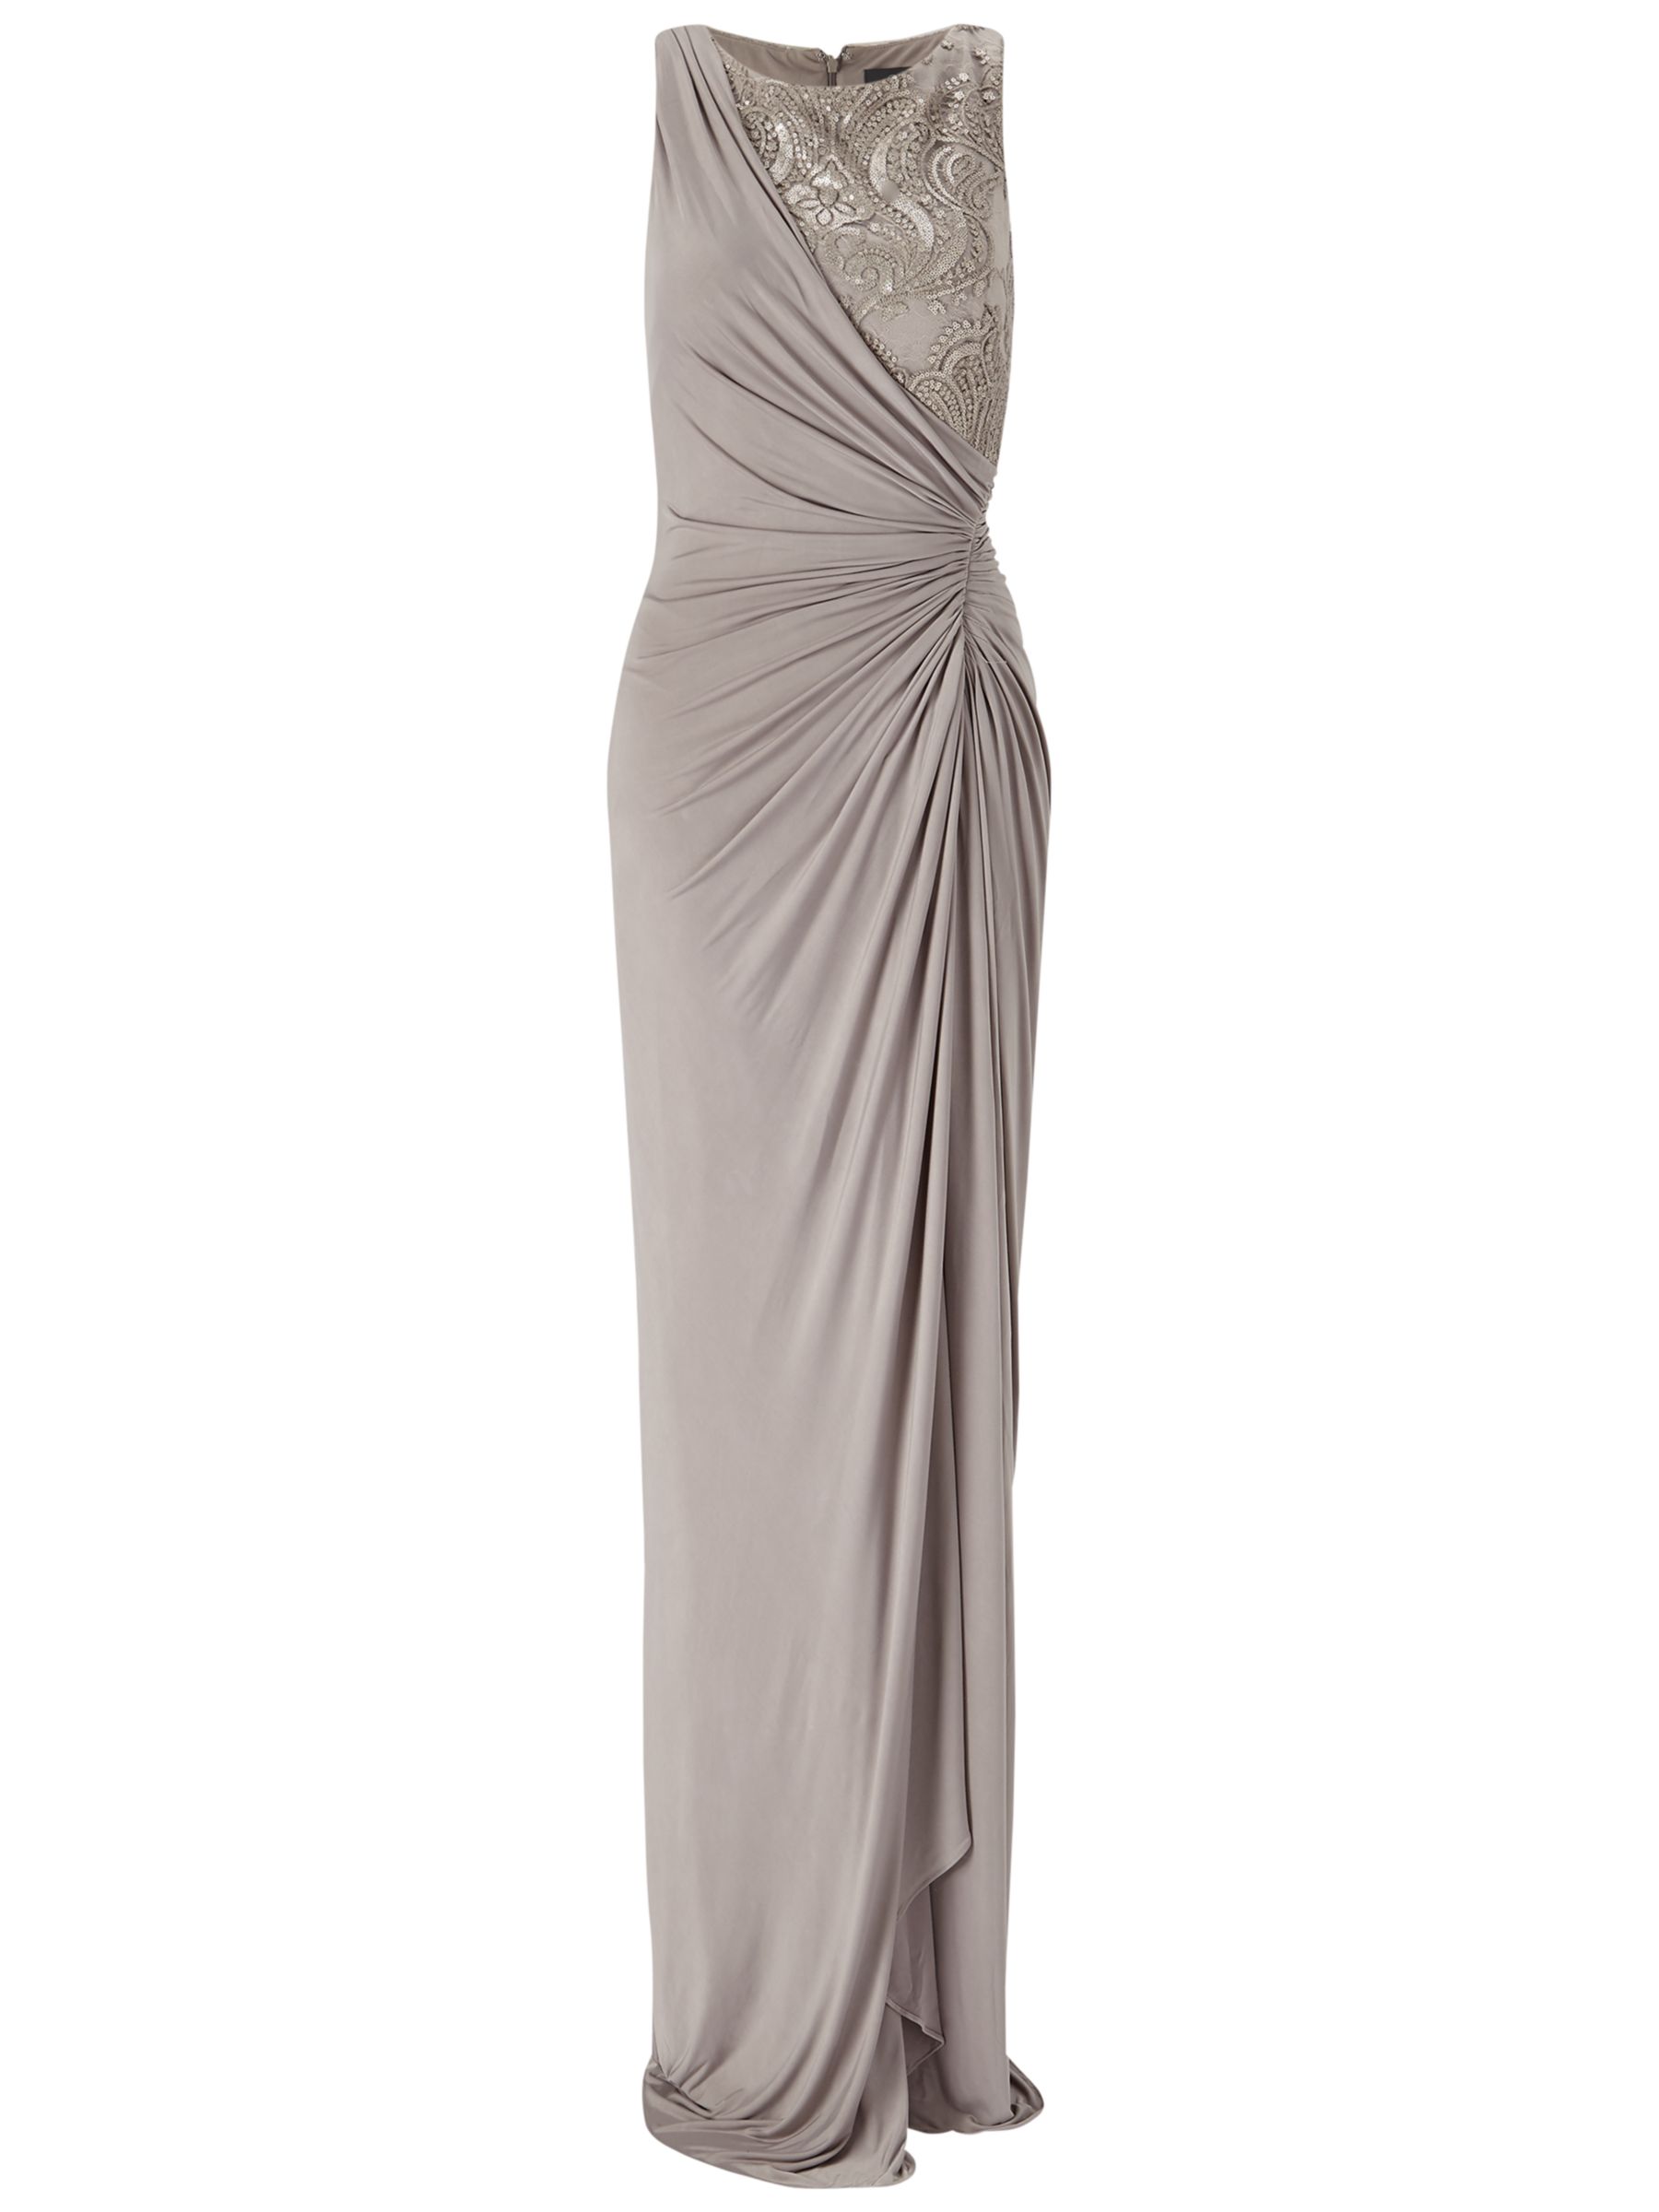 Adrianna Papell Sleeveless Sequin Lace Jersey Gown, Mink